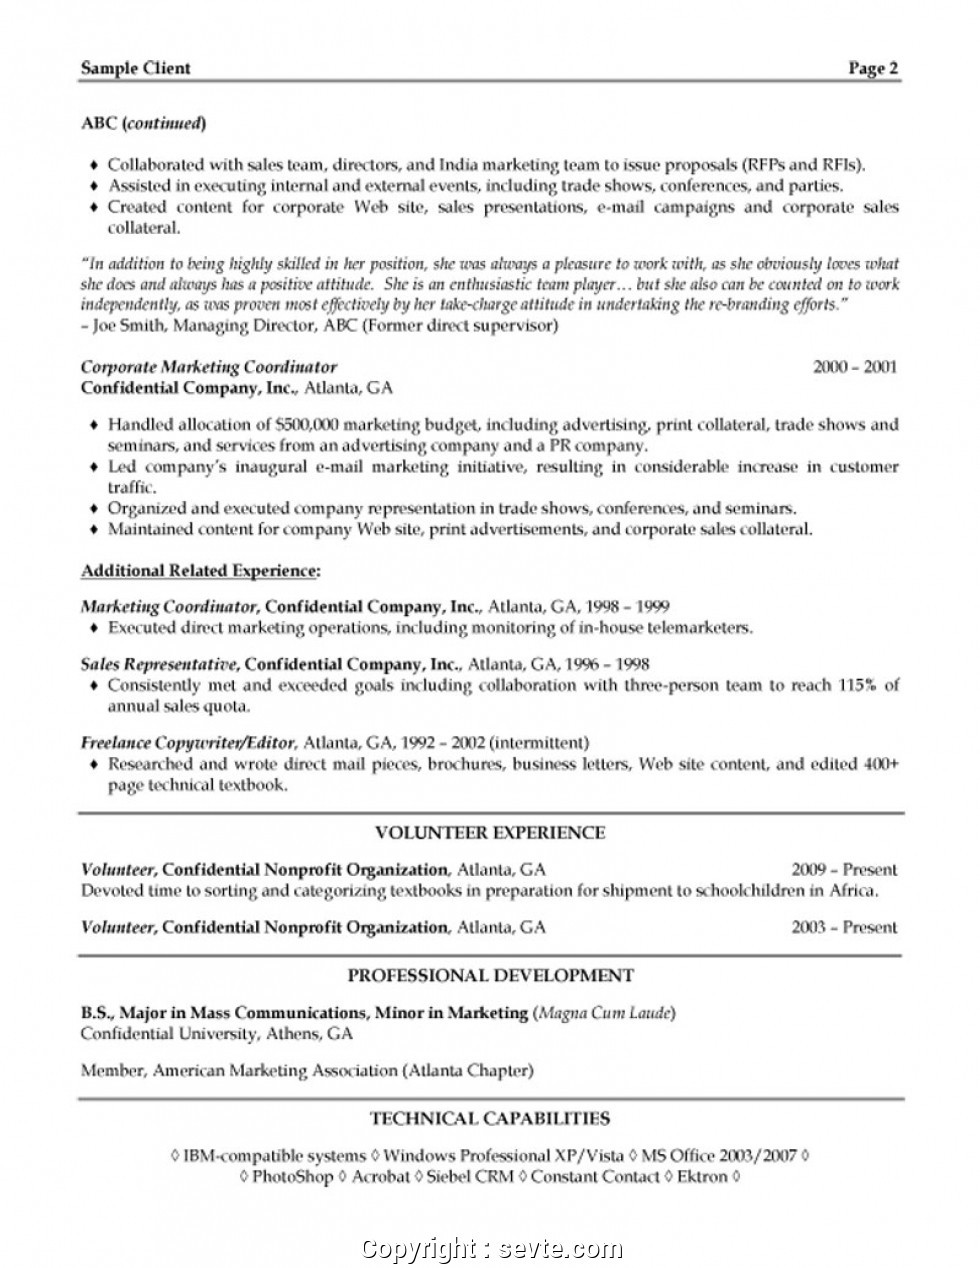 Sample Resume for Sales and Marketing Manager assistant Marketing Manager Resume Www.bilderbeste.com